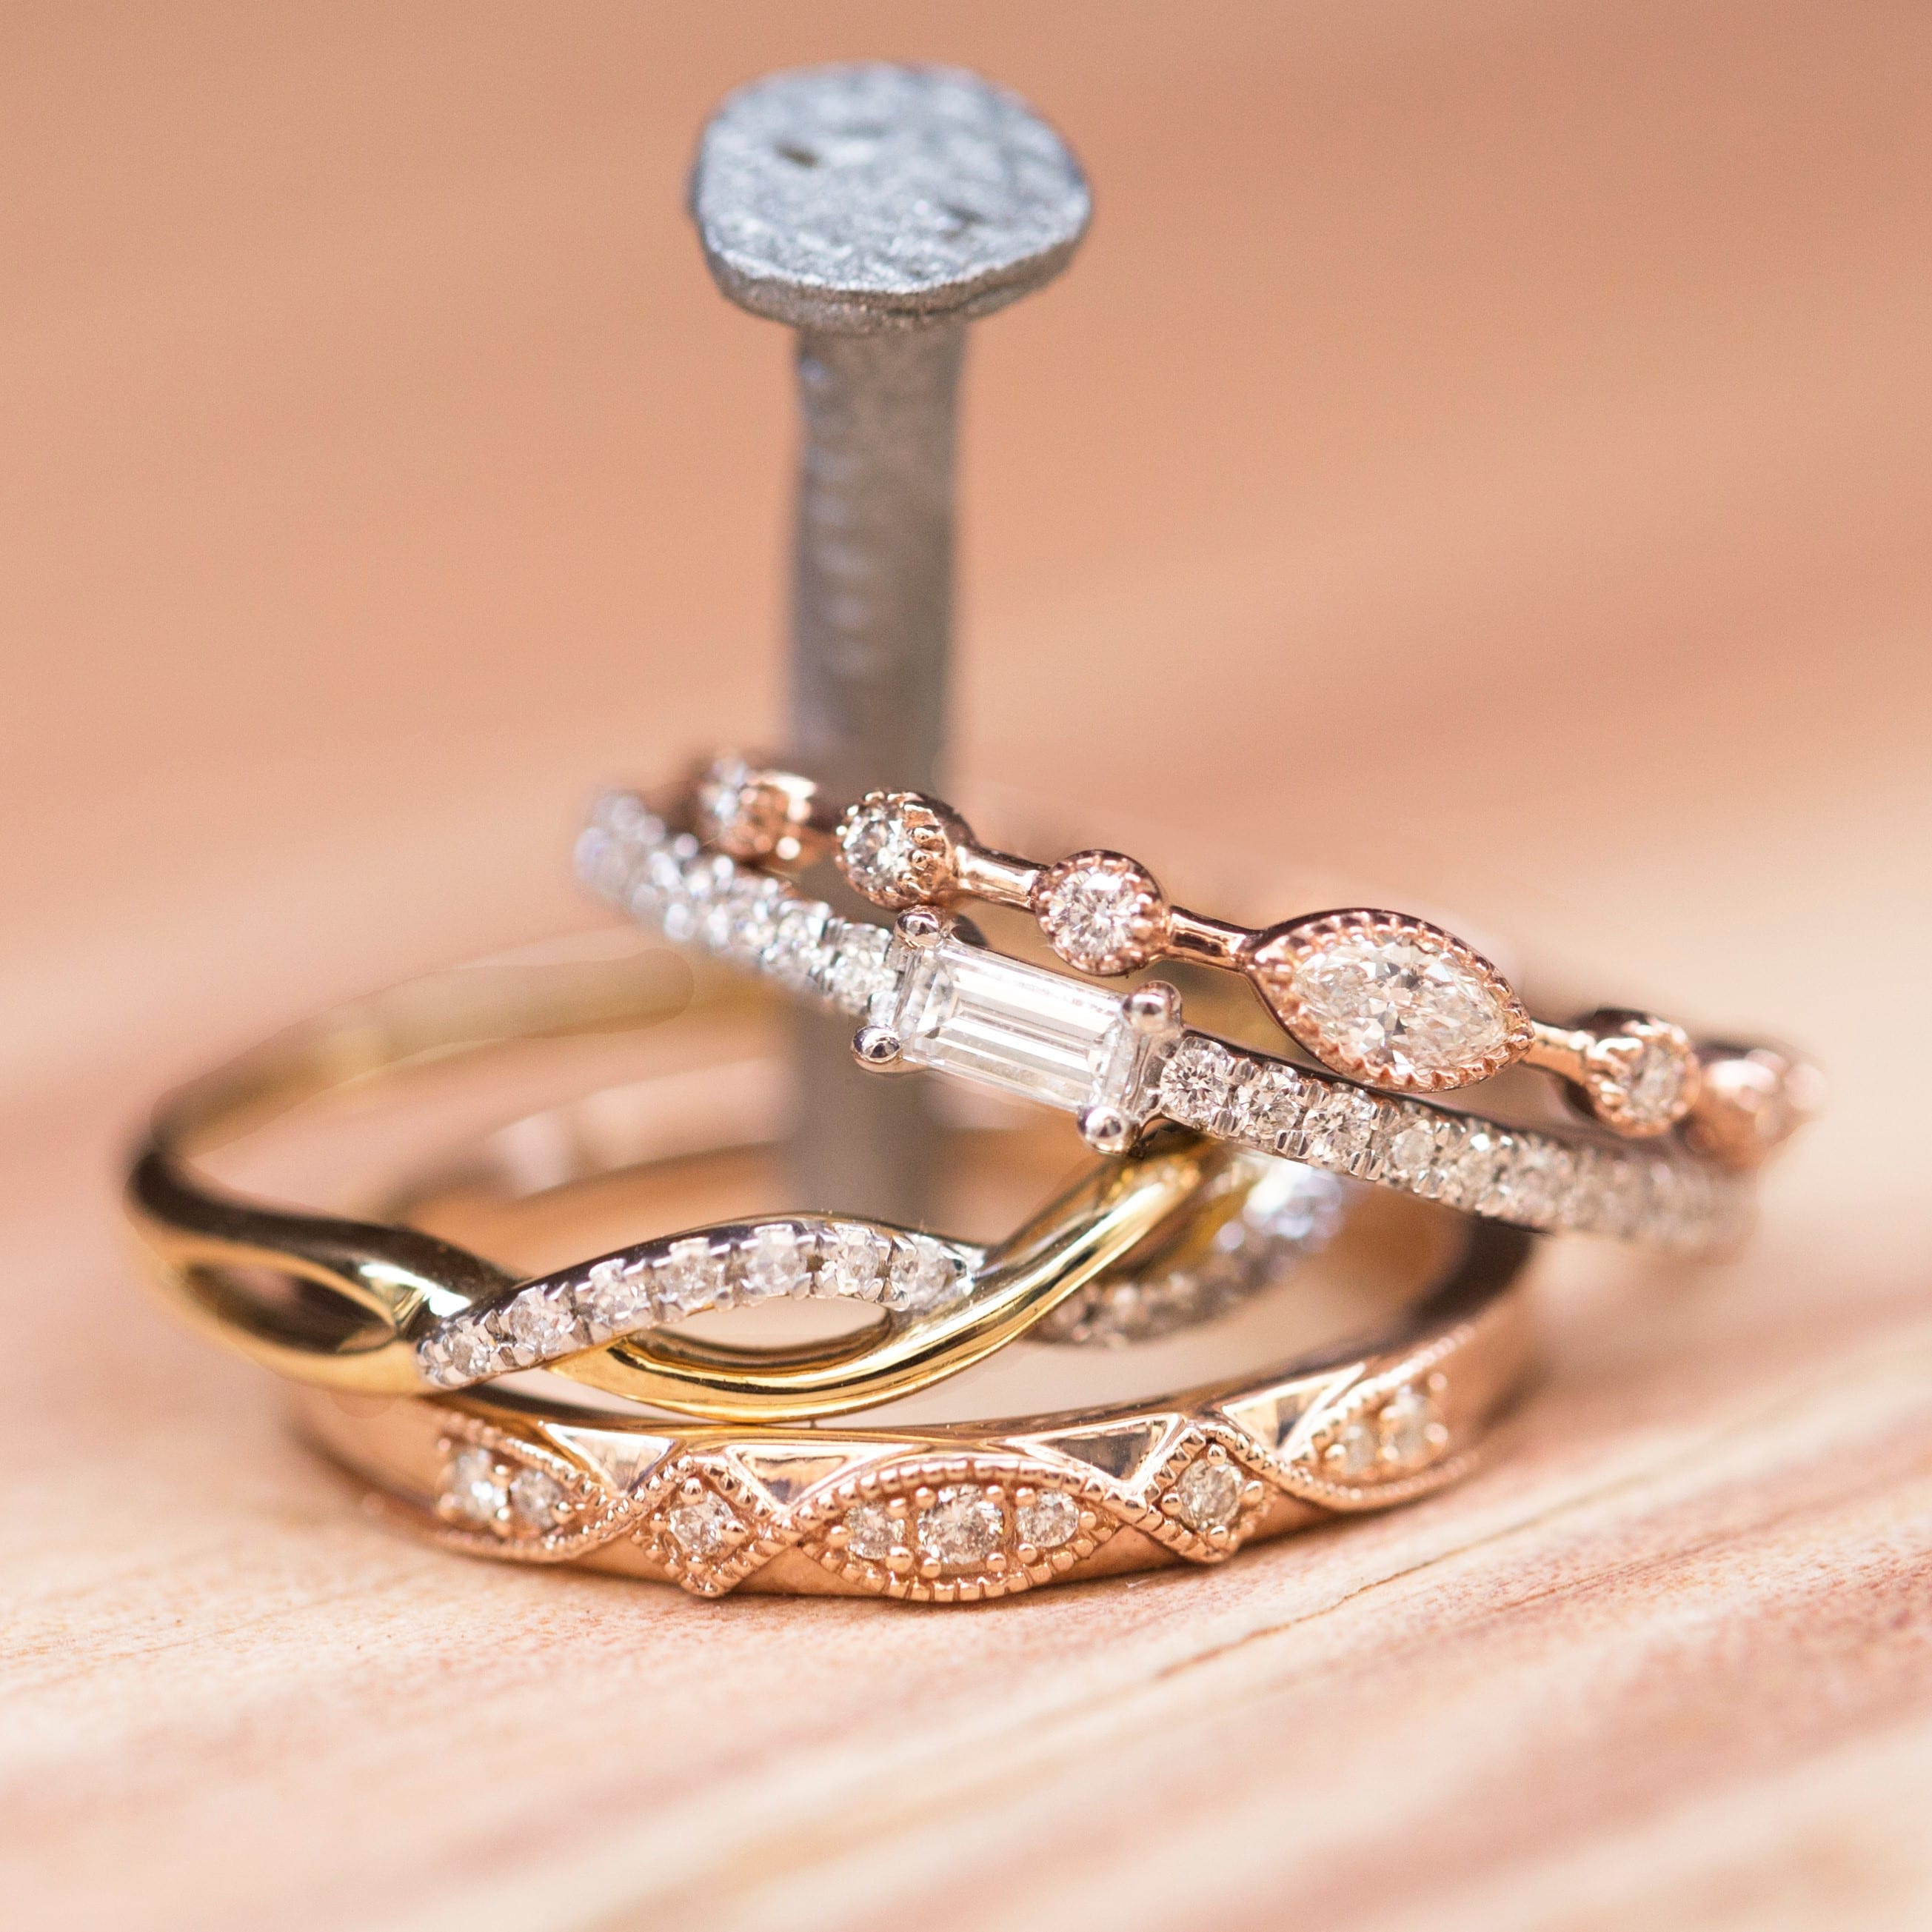 Four bands stacked on top of a nail to show how the stackable style works.